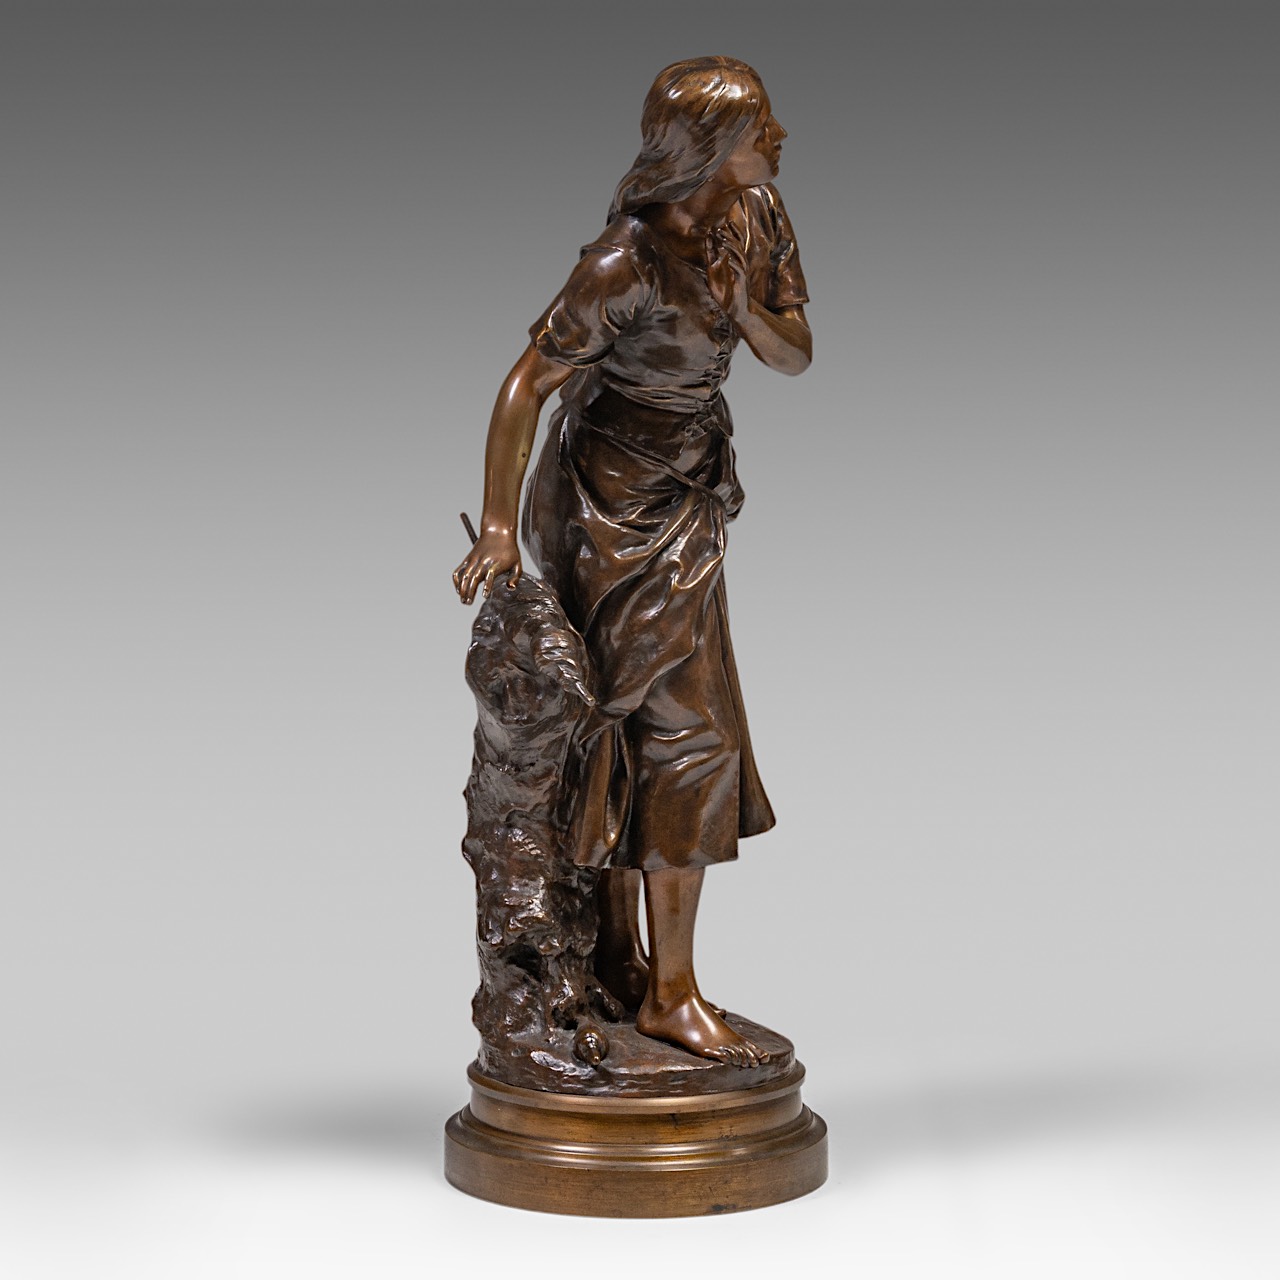 Mathurin Moreau (1822-1912), the spinner, patinated bronze, Hors Concours, H 89 cm - Image 6 of 8